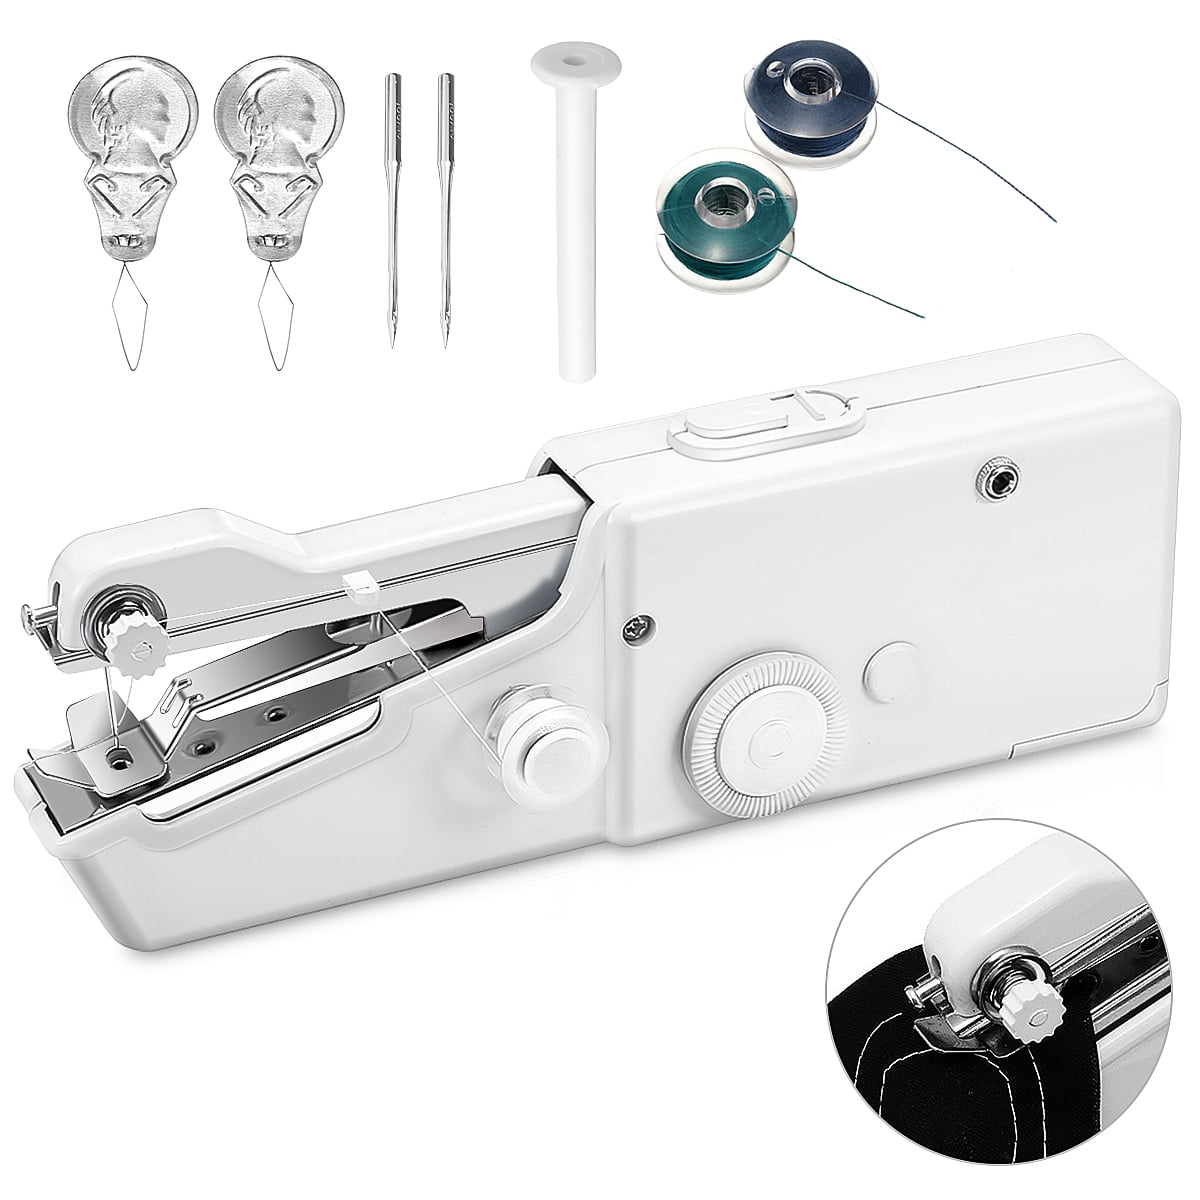 Handheld Sewing Machine, Mini Portable Sewing Machine, Quick Handheld Stitch Tool for Beginners, Size: 1XL